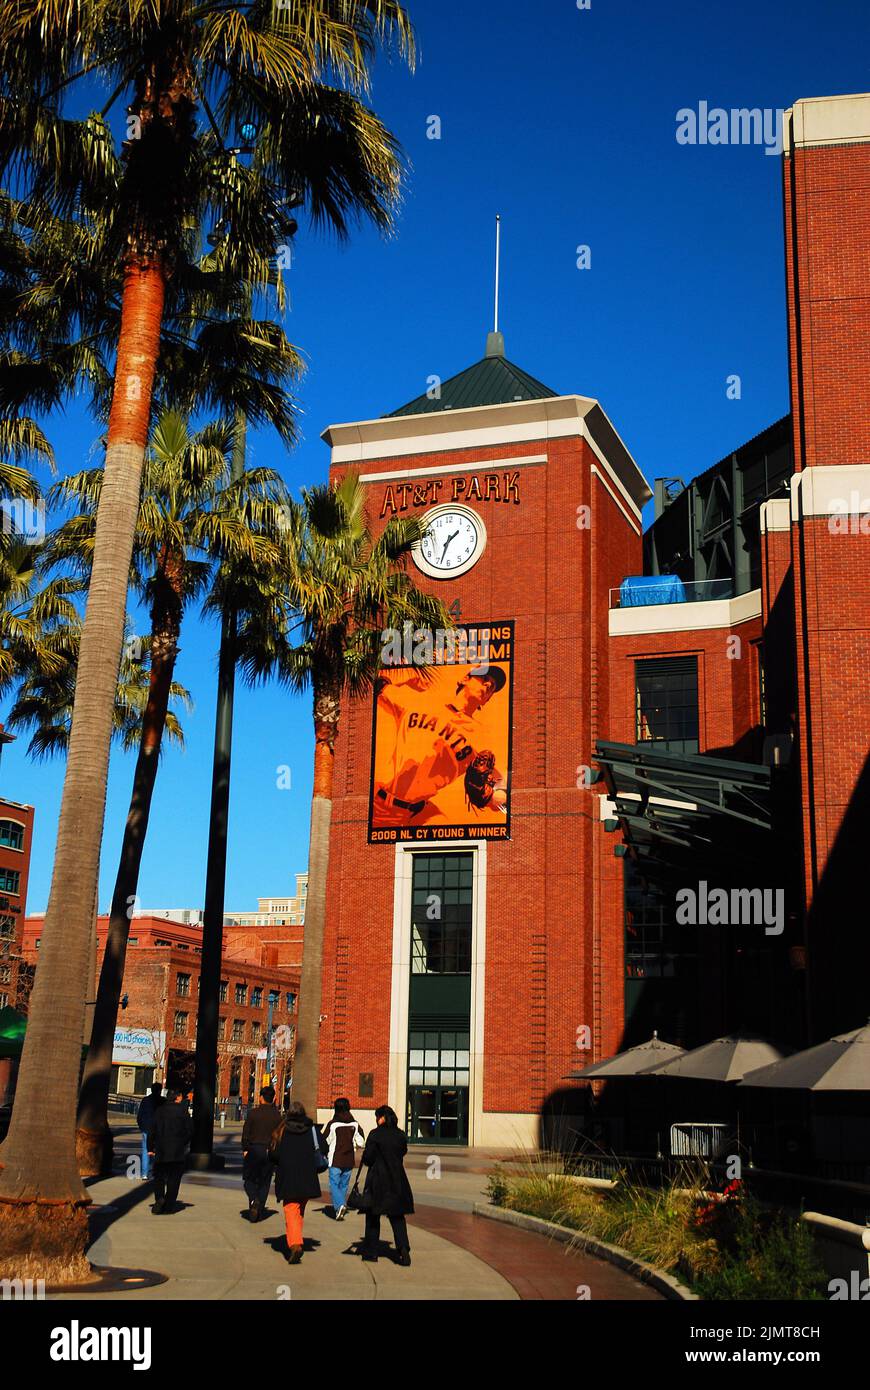 The exterior of AT&T Ballpark, home of the San Francisco Giants, is built in the classic style of past baseball stadiums Stock Photo